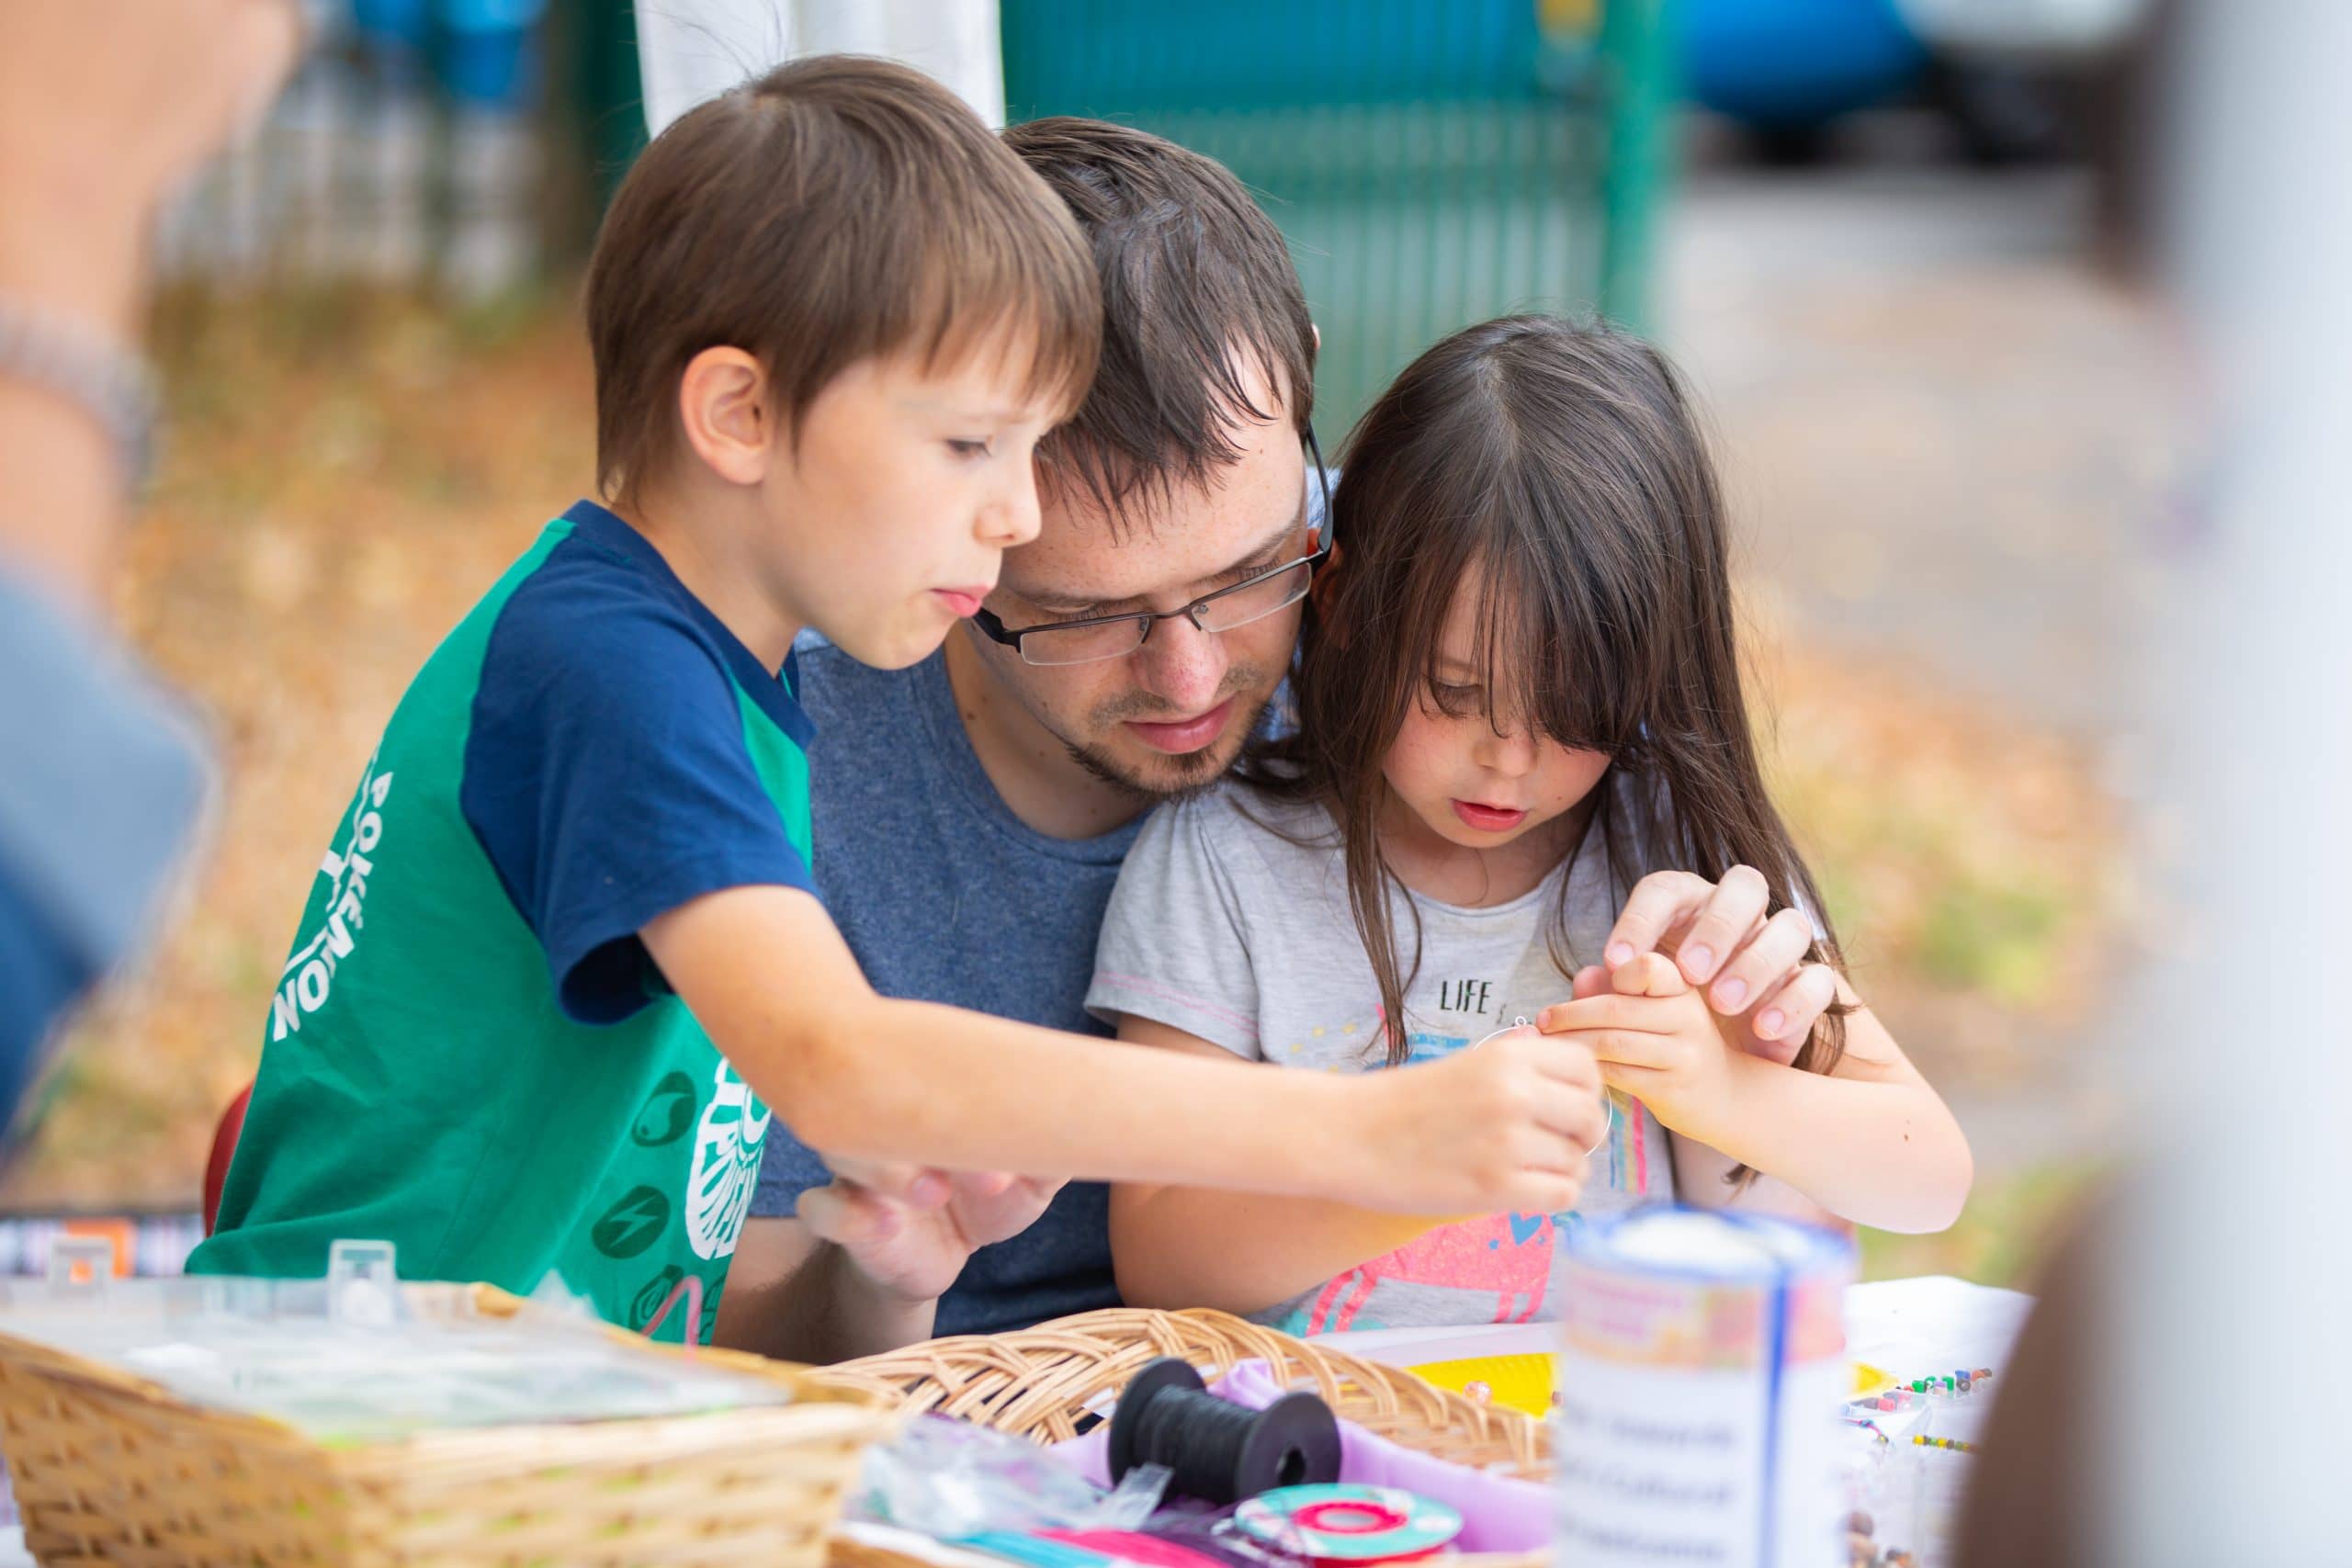 An adult and two children work together on a handmade craft